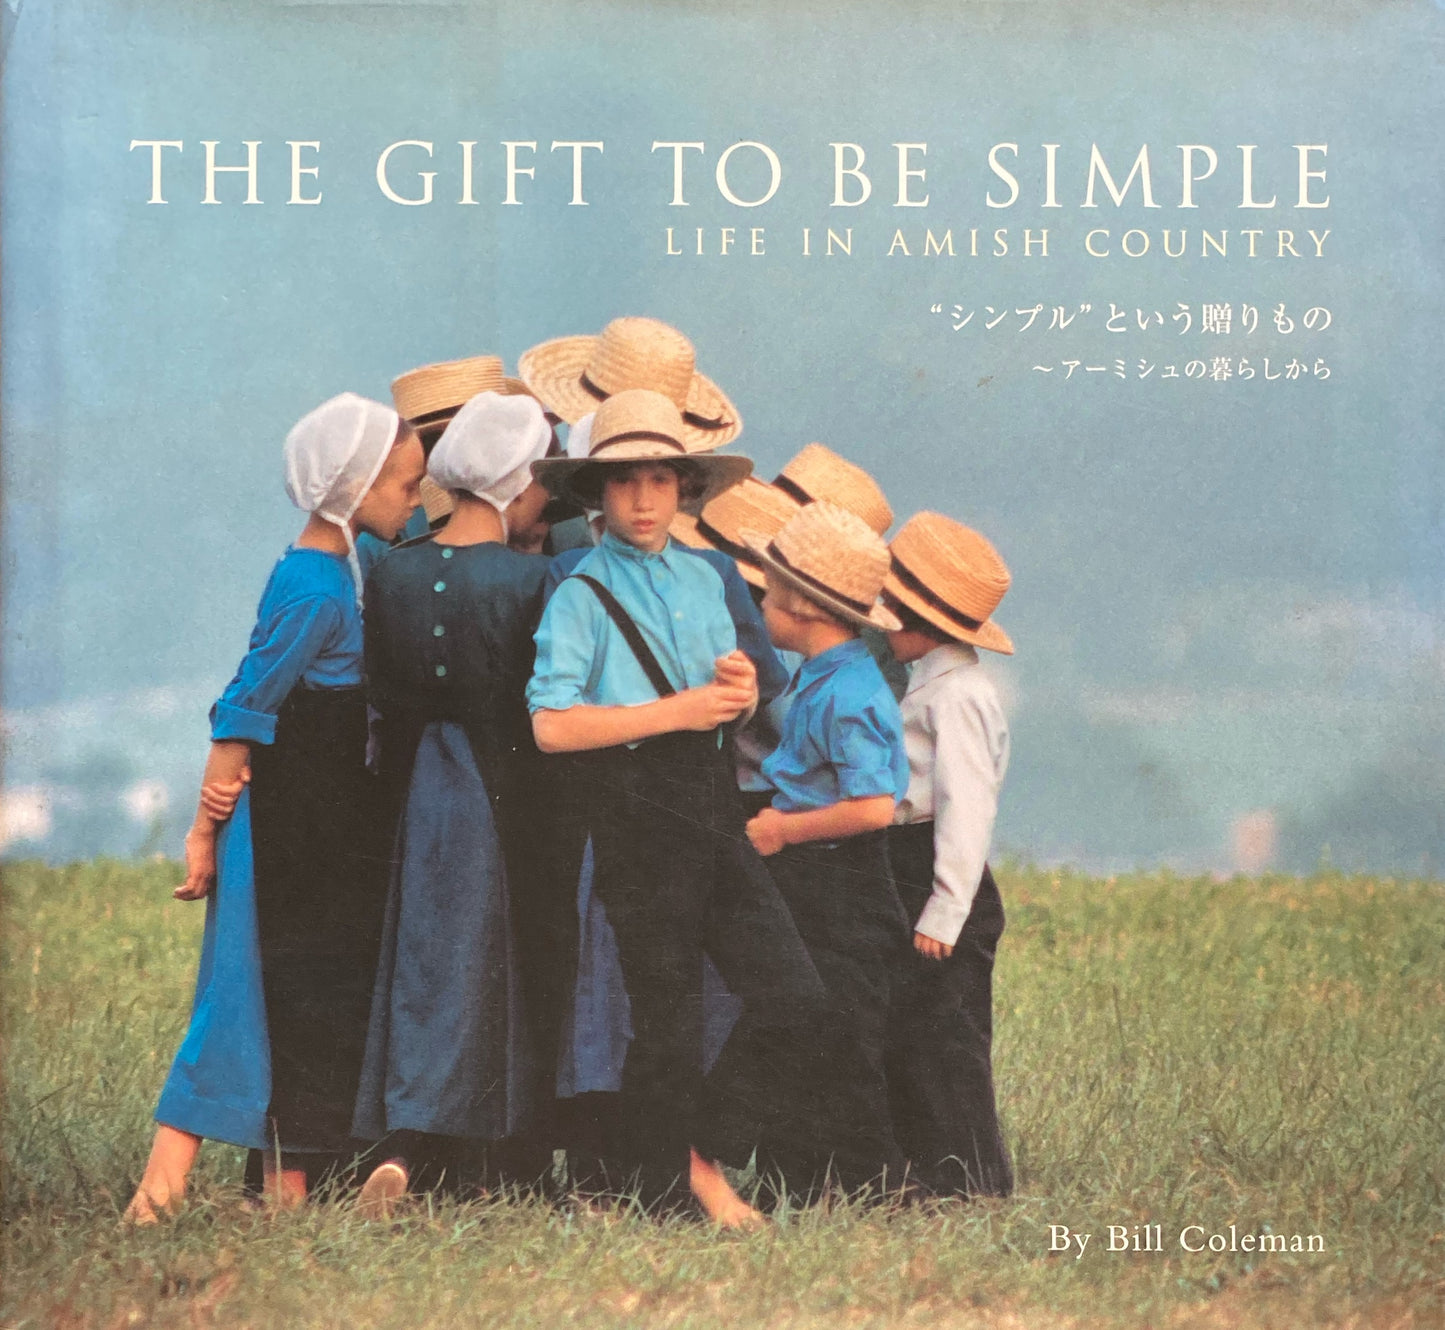 THE GIFT TO BE SIMPLE　シンプルという贈り物　アーミシュの暮らしから　Bill Coleman